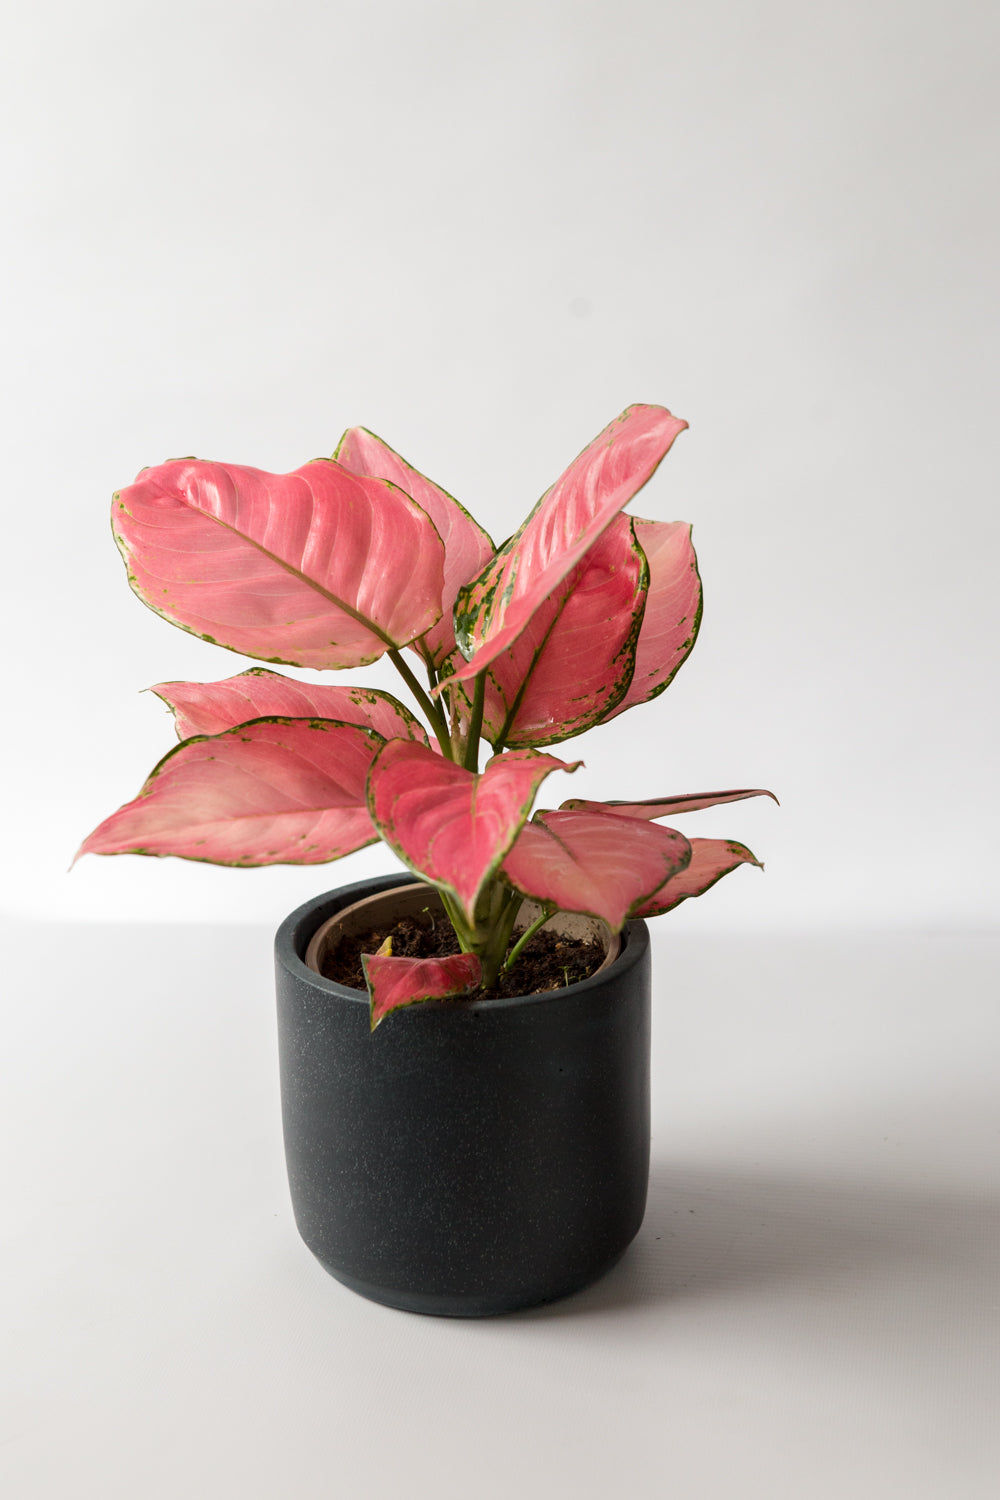 Chinese Evergreen Pink Star Plant in a Dark Hand-Cast Pot by Concrete Jungle